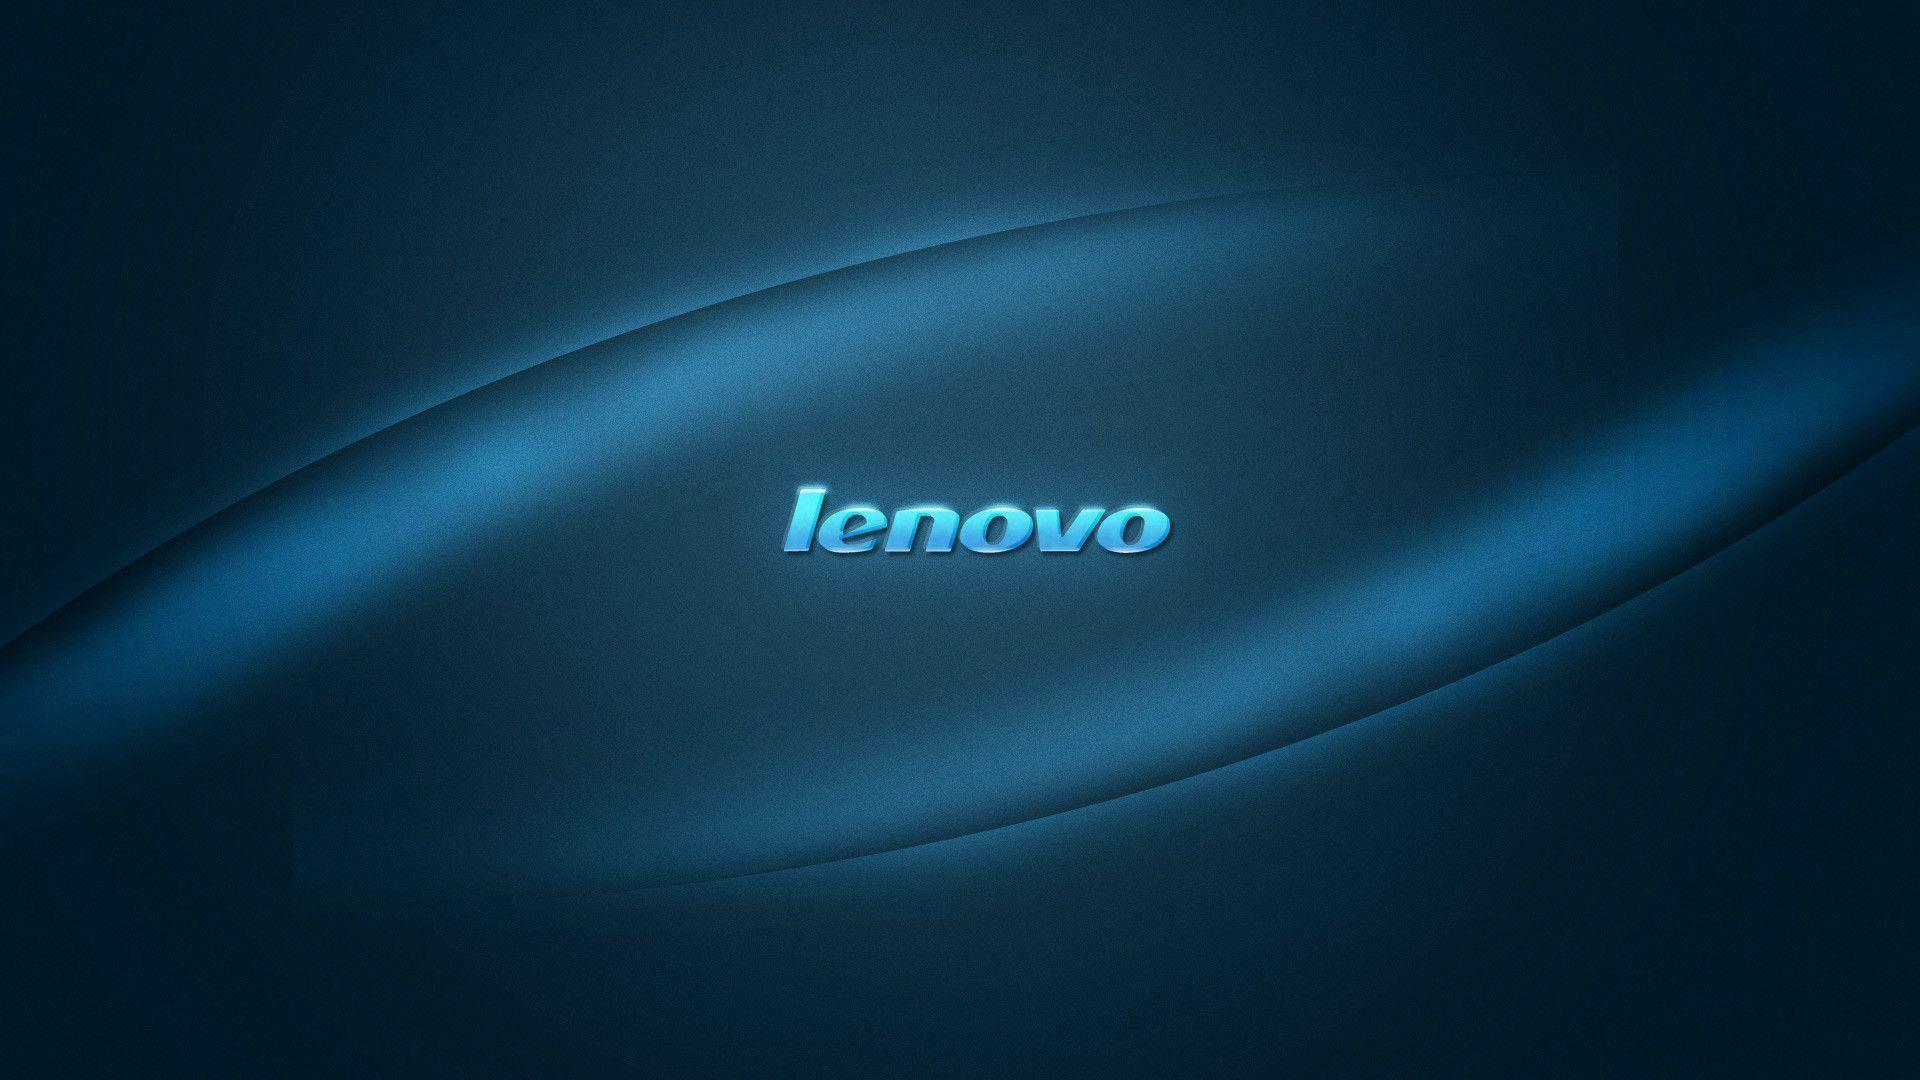 Lenovo Wallpaper Collection in HD for Download. Android